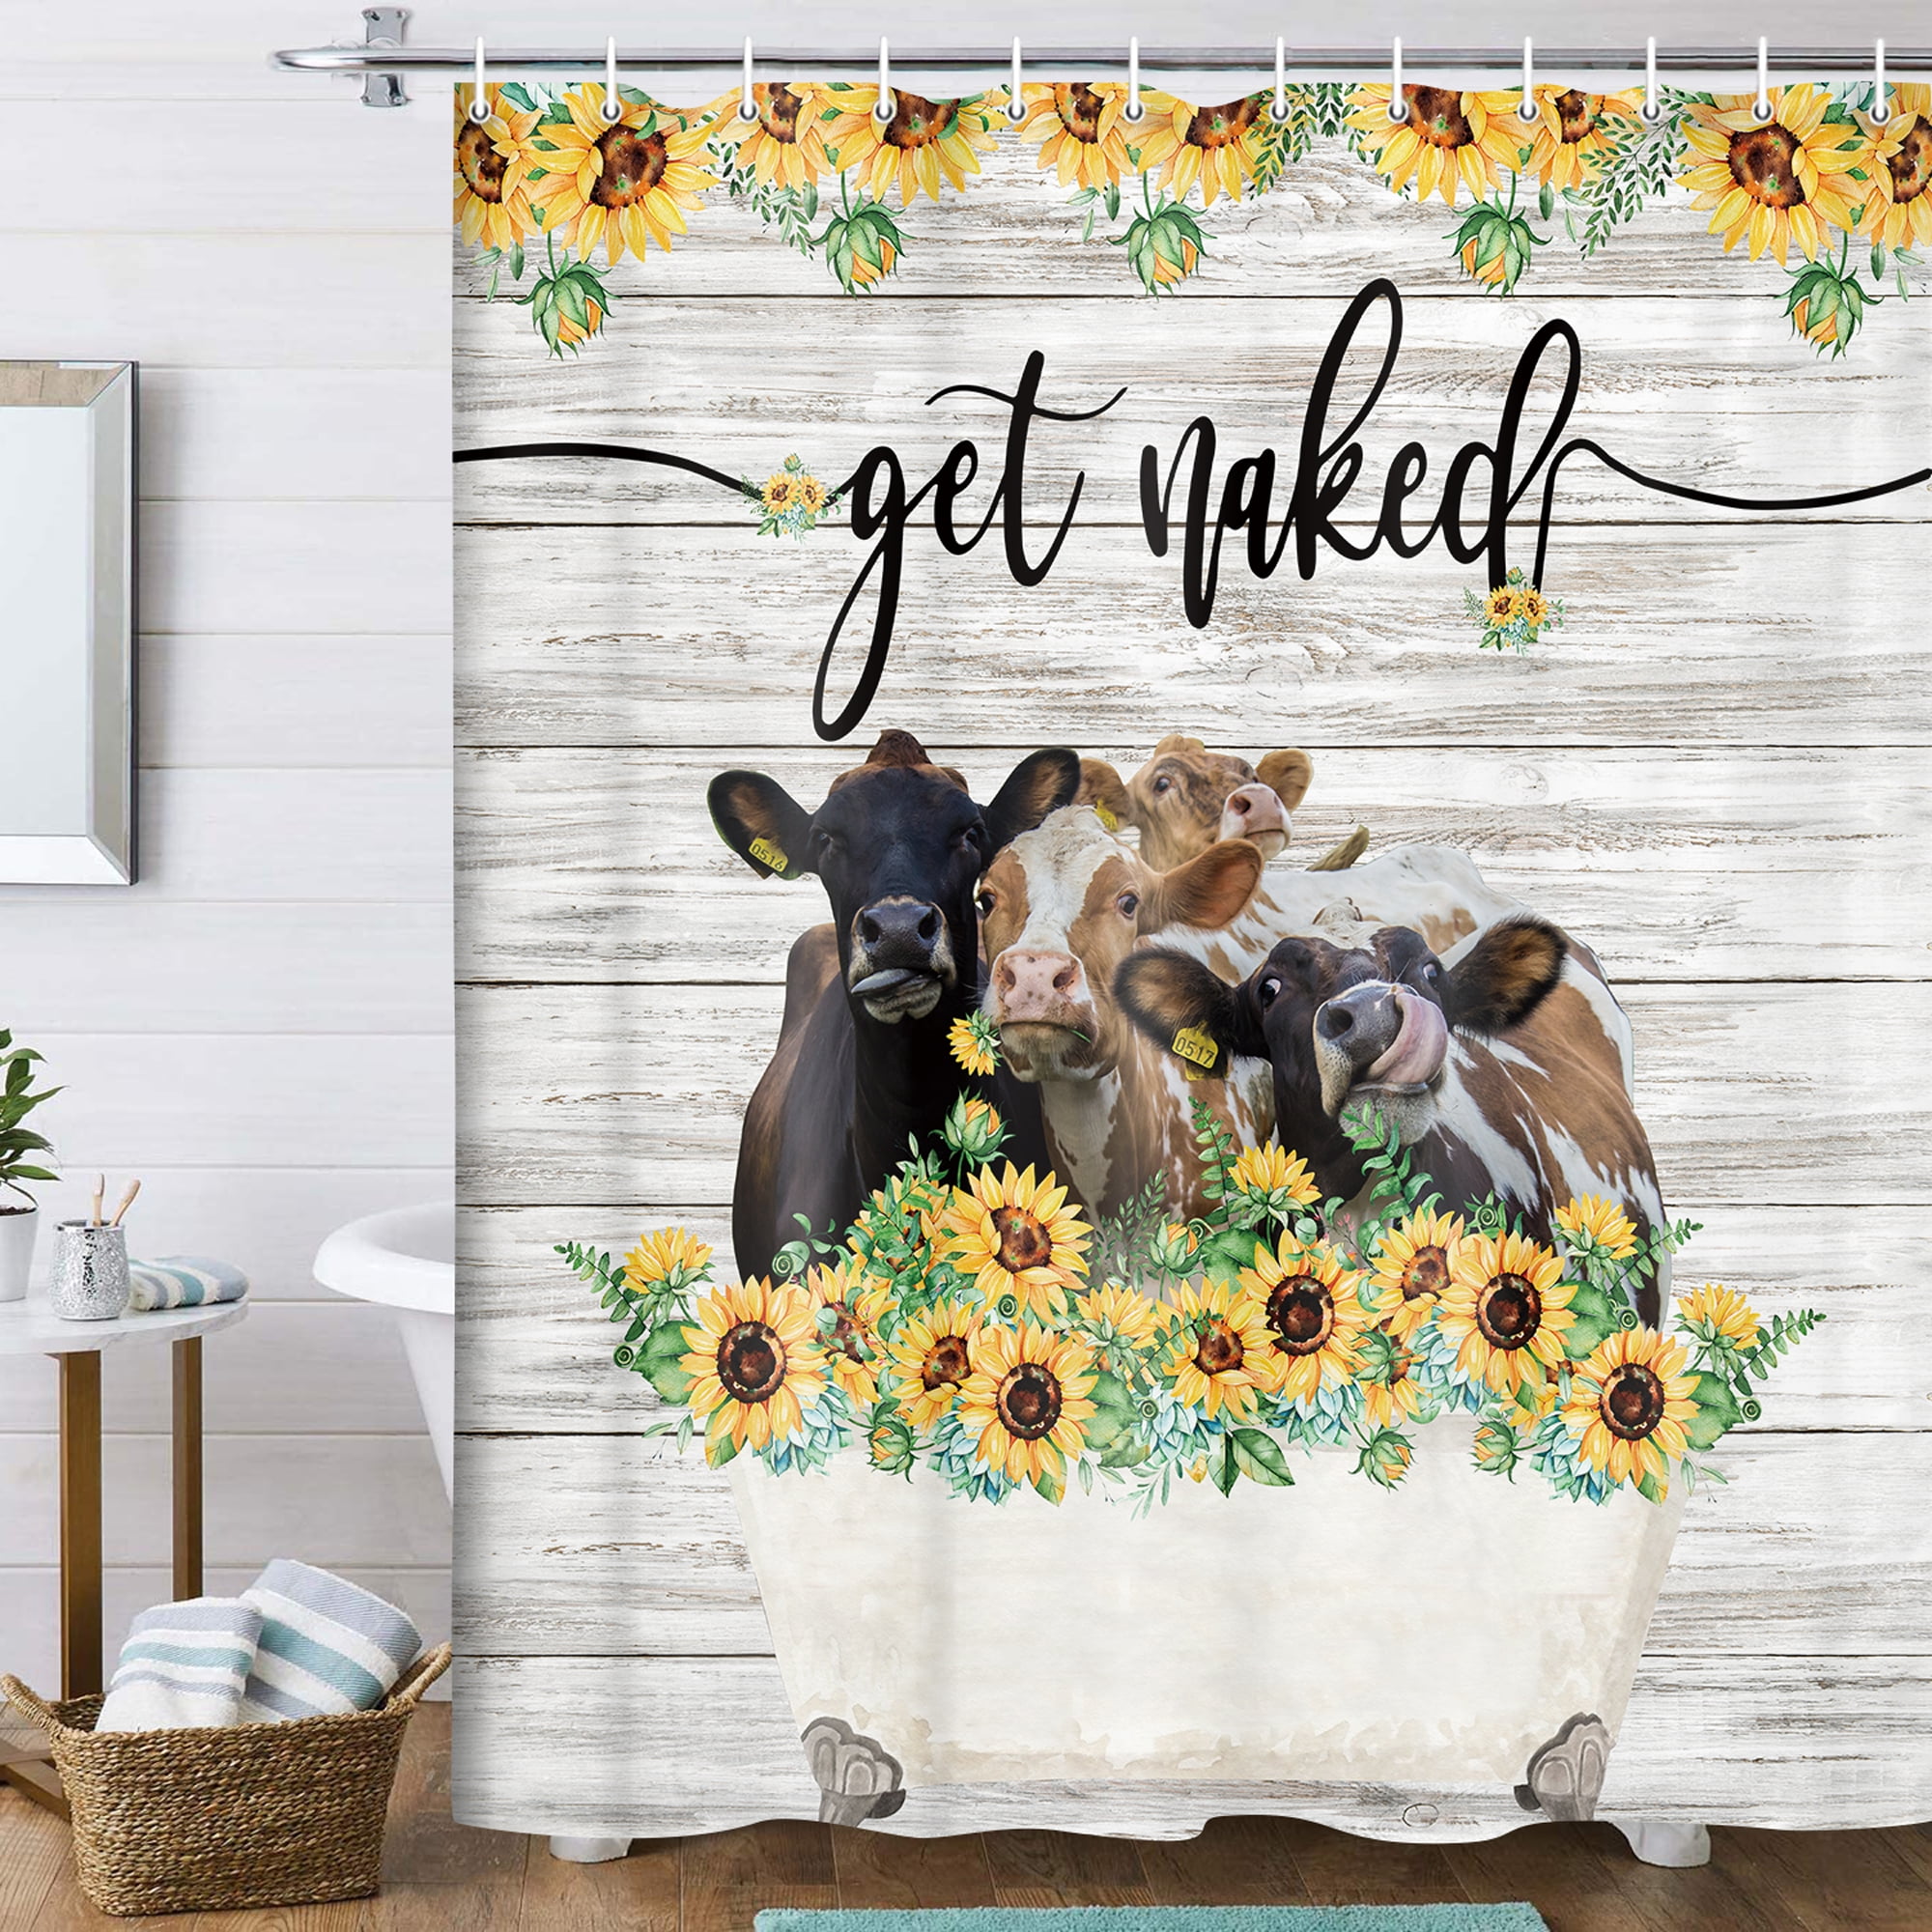 Details about   Funny Cow Heifers Sunflowers Wood Plank Fabric Shower Curtain Set Bathroom Decor 